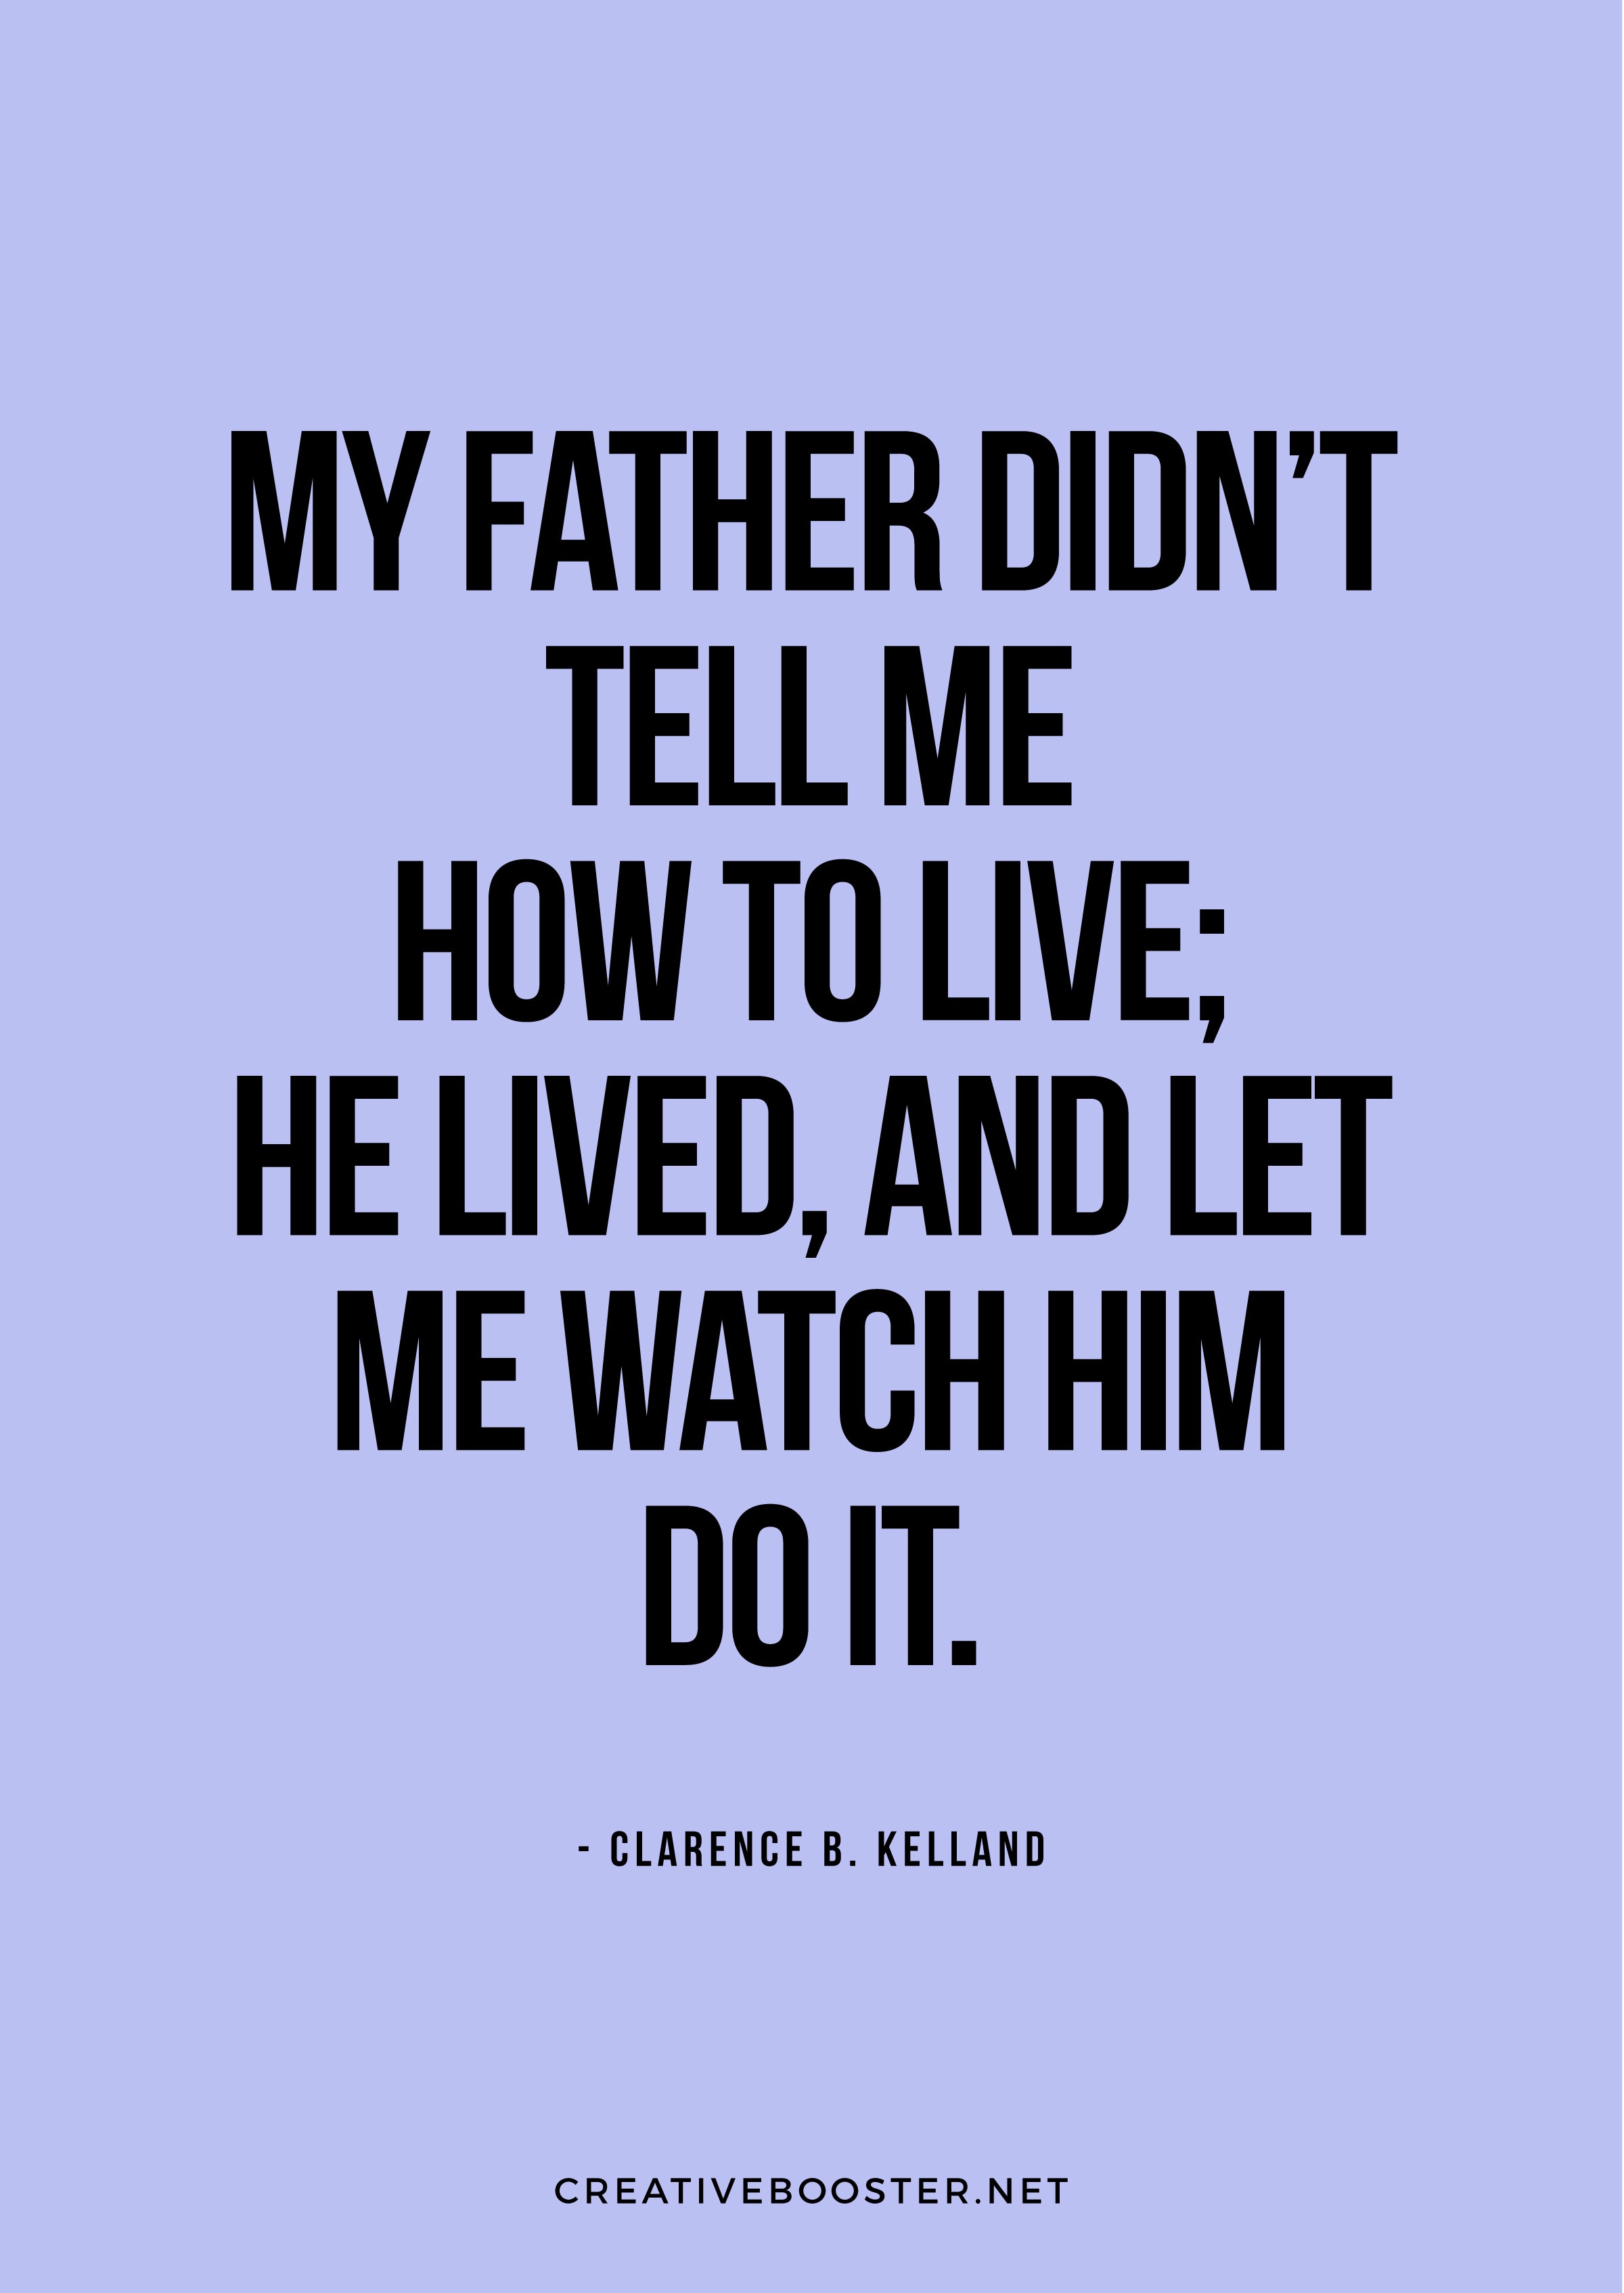 You-Are-An-Amazing-Father-Quotes---'My-father-didn’t-tell-me-how-to-live;-he-lived,-and-let-me-watch-him-do-it.'-–-Clarence-B.-Kelland-(Quote-Art-Print)